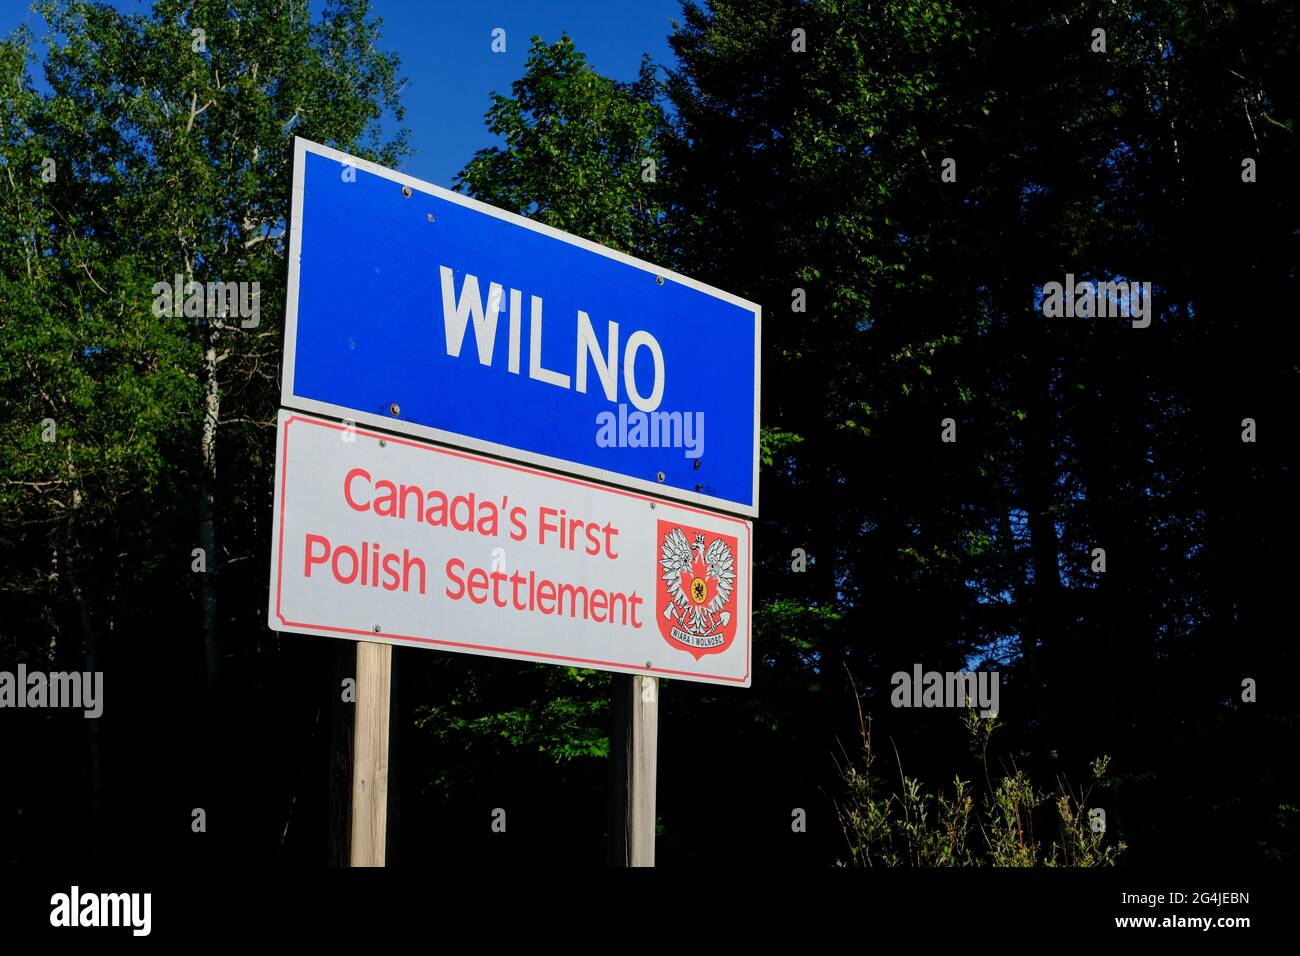 Wilno, Ontario, Canada - June 16, 2021: A sign along Highway 60 labels Wilno as the site of Canada's first Polish settlement. Stock Photo